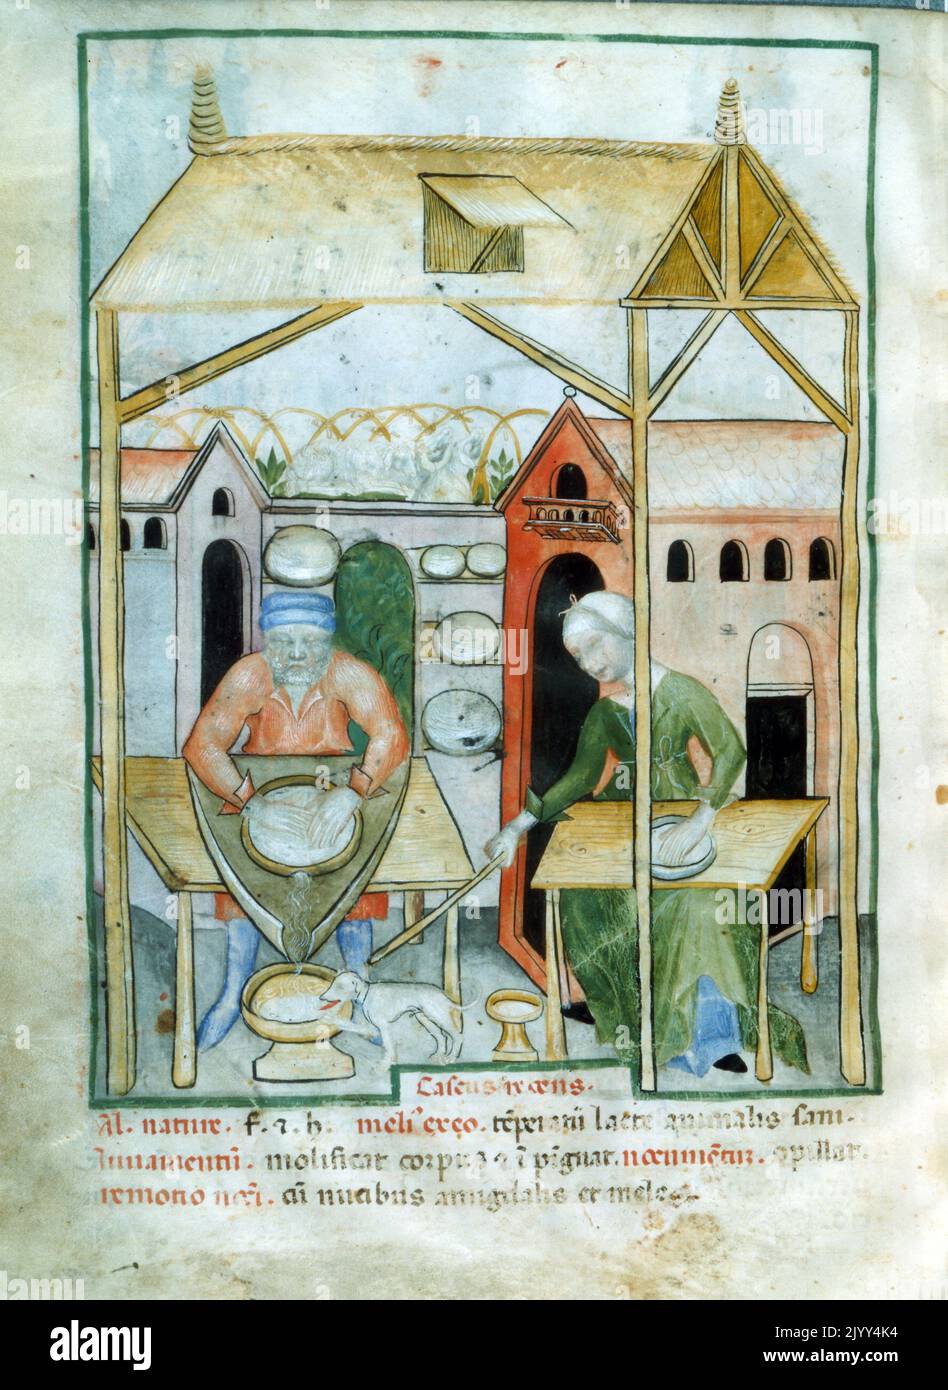 Medieval cheese preparation, illustrated in Tacuinum (Taccuinum) Sanitatis, a medieval handbook mainly on health, based on the Taqwim as-sihhah, an eleventh-century Arab medical treatise by Ibn Butlan of Baghdad. This Taccuinum dates to the early 15th century and is Italian in origin. circa 1531. Stock Photo